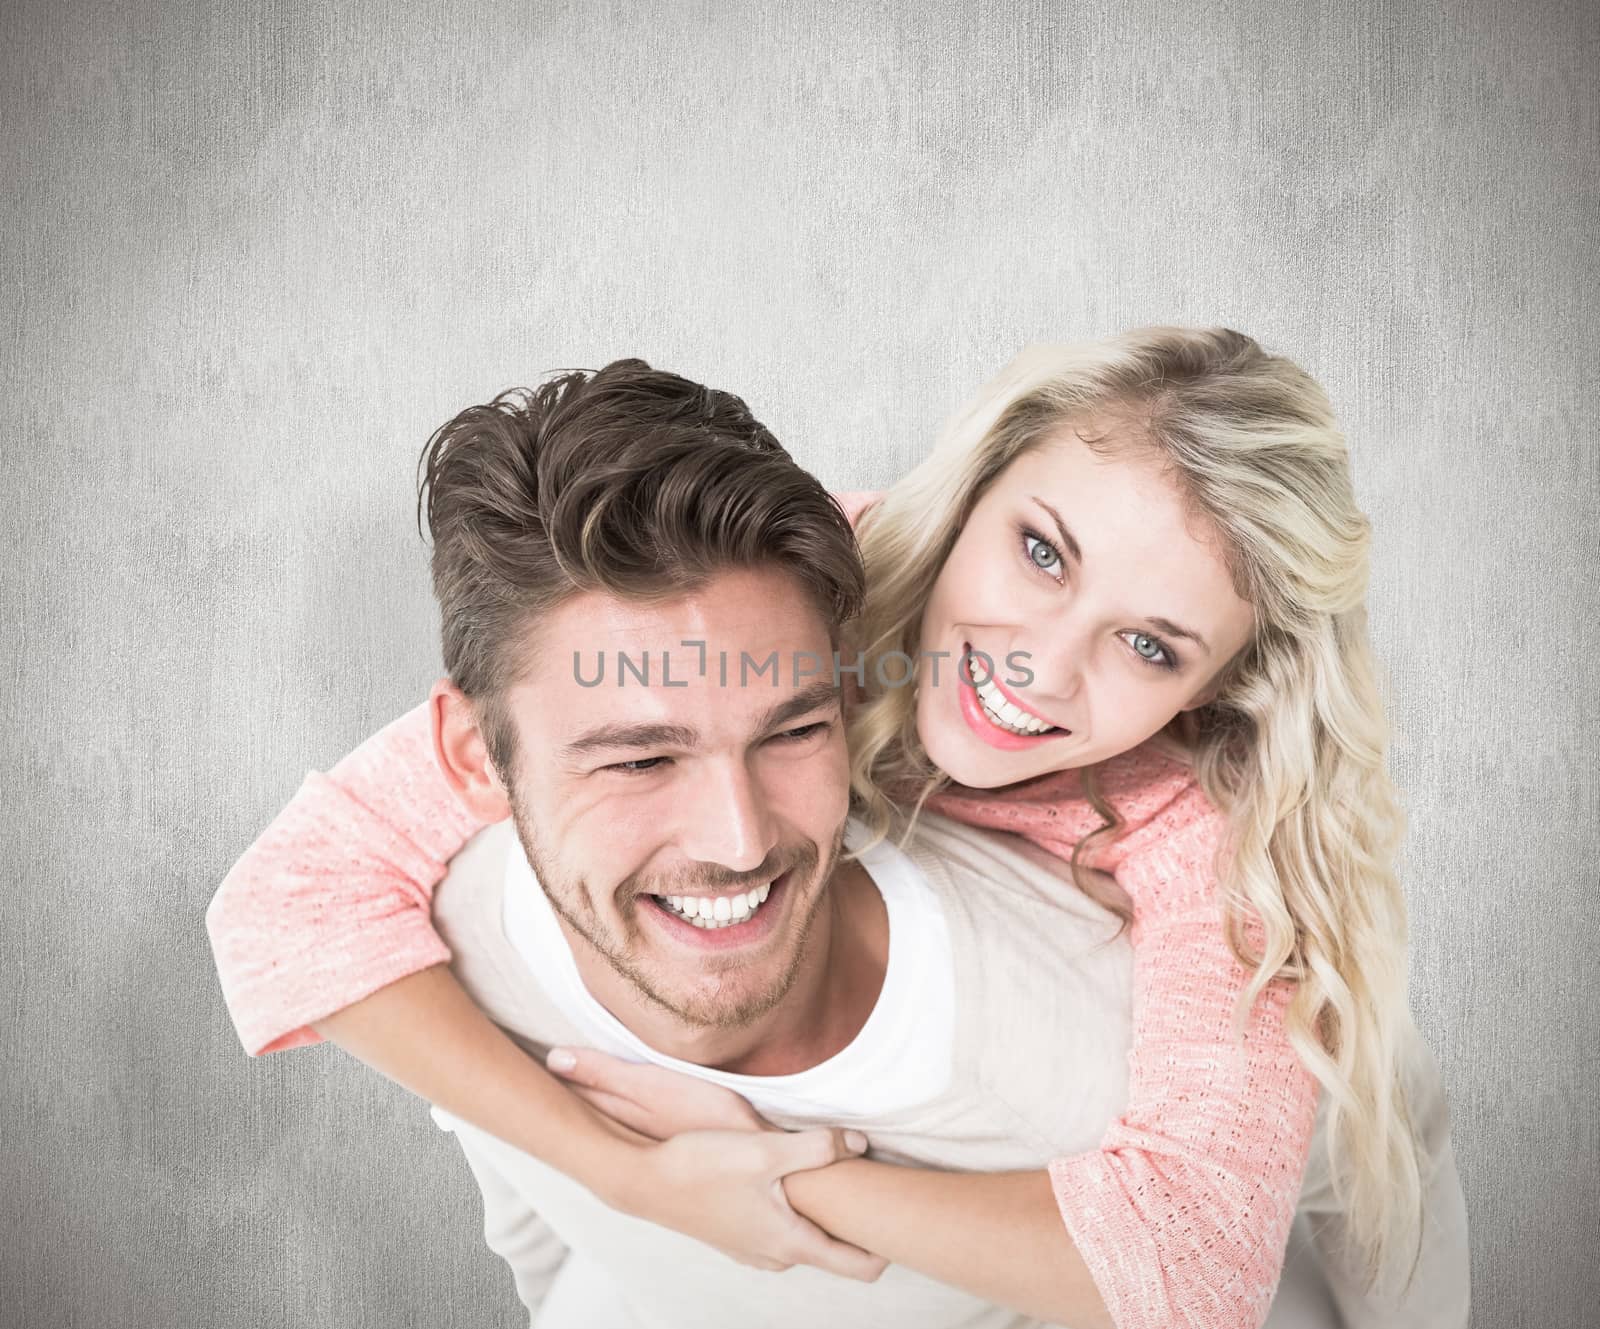 Handsome man giving piggy back to his girlfriend against white background